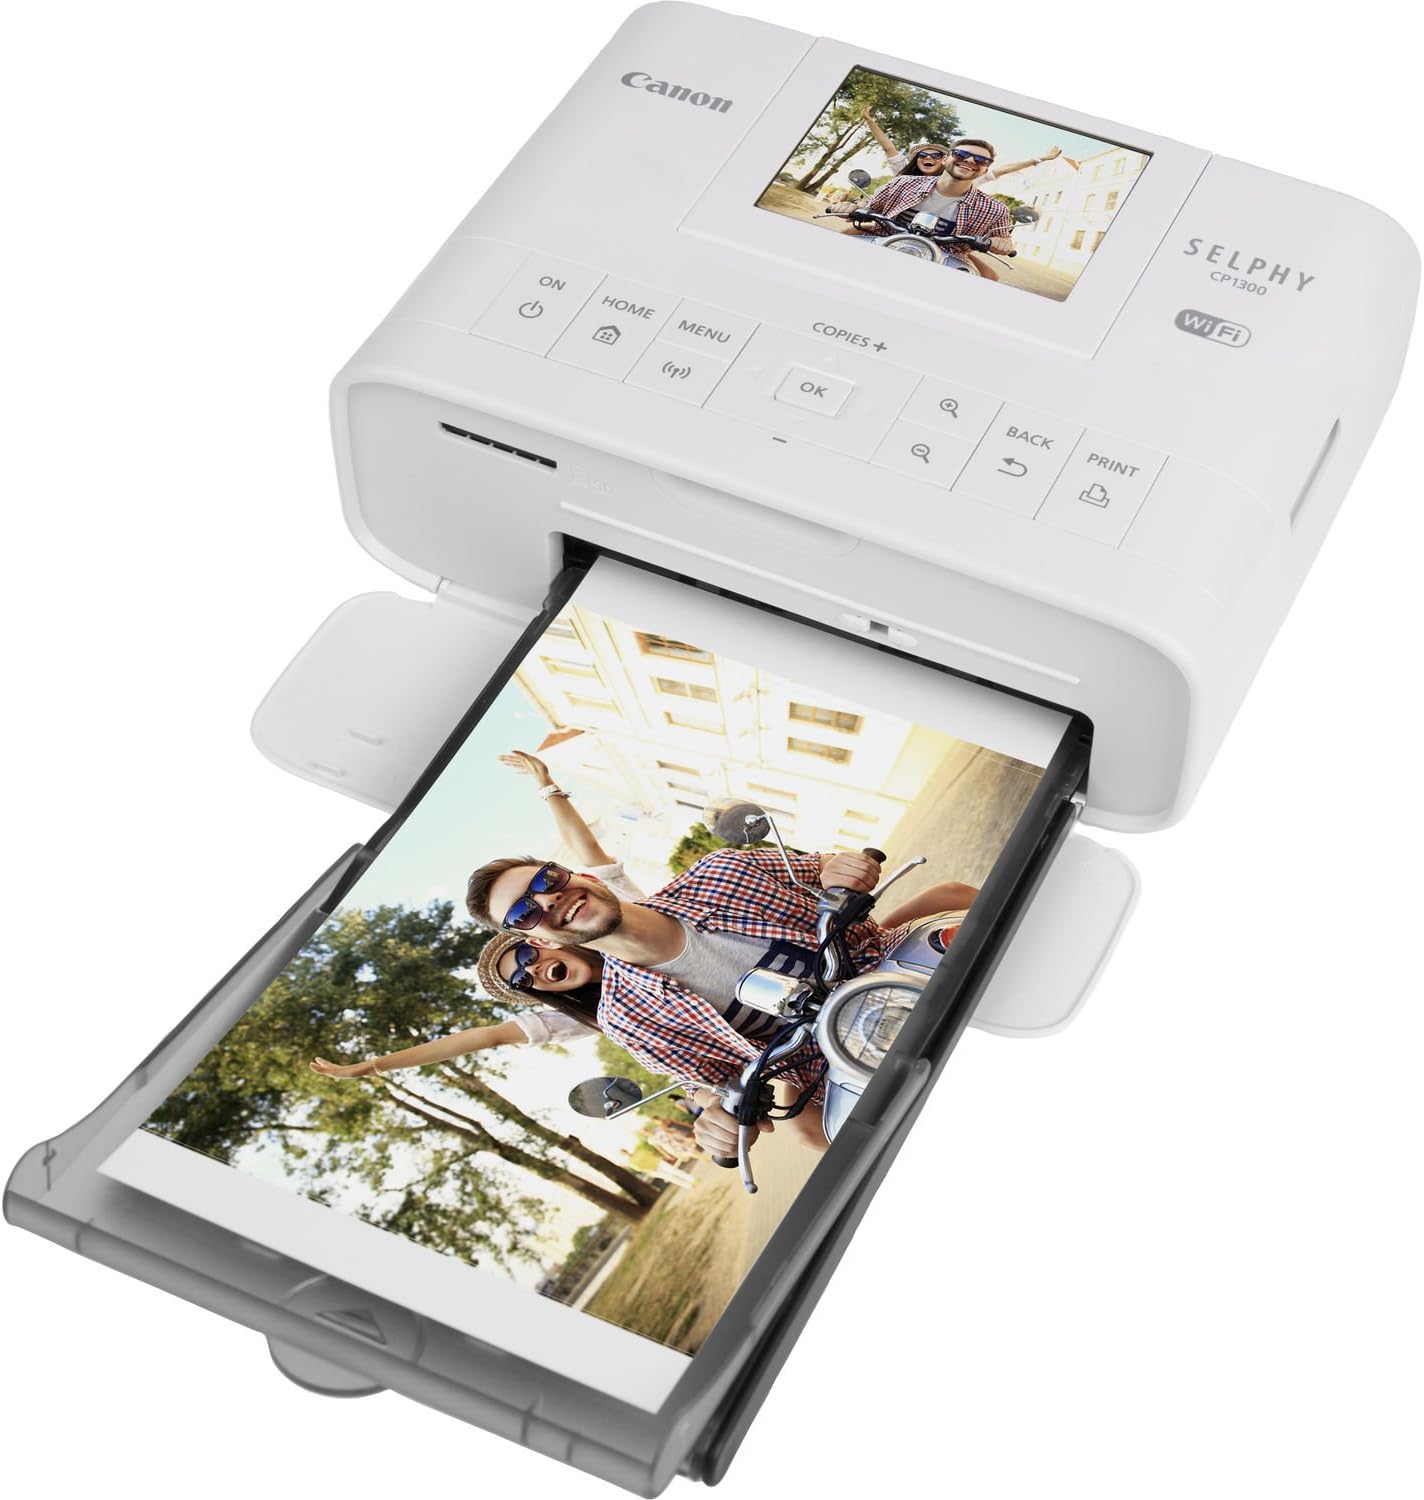 Assessment of Canon SELPHY CP1300 Wireless Compact Photo Printer (White) + Canon KP-108IN Color Ink Paper Set + USB Printer Cable + HeroFiber Ultra Gentle Cleaning Cloth